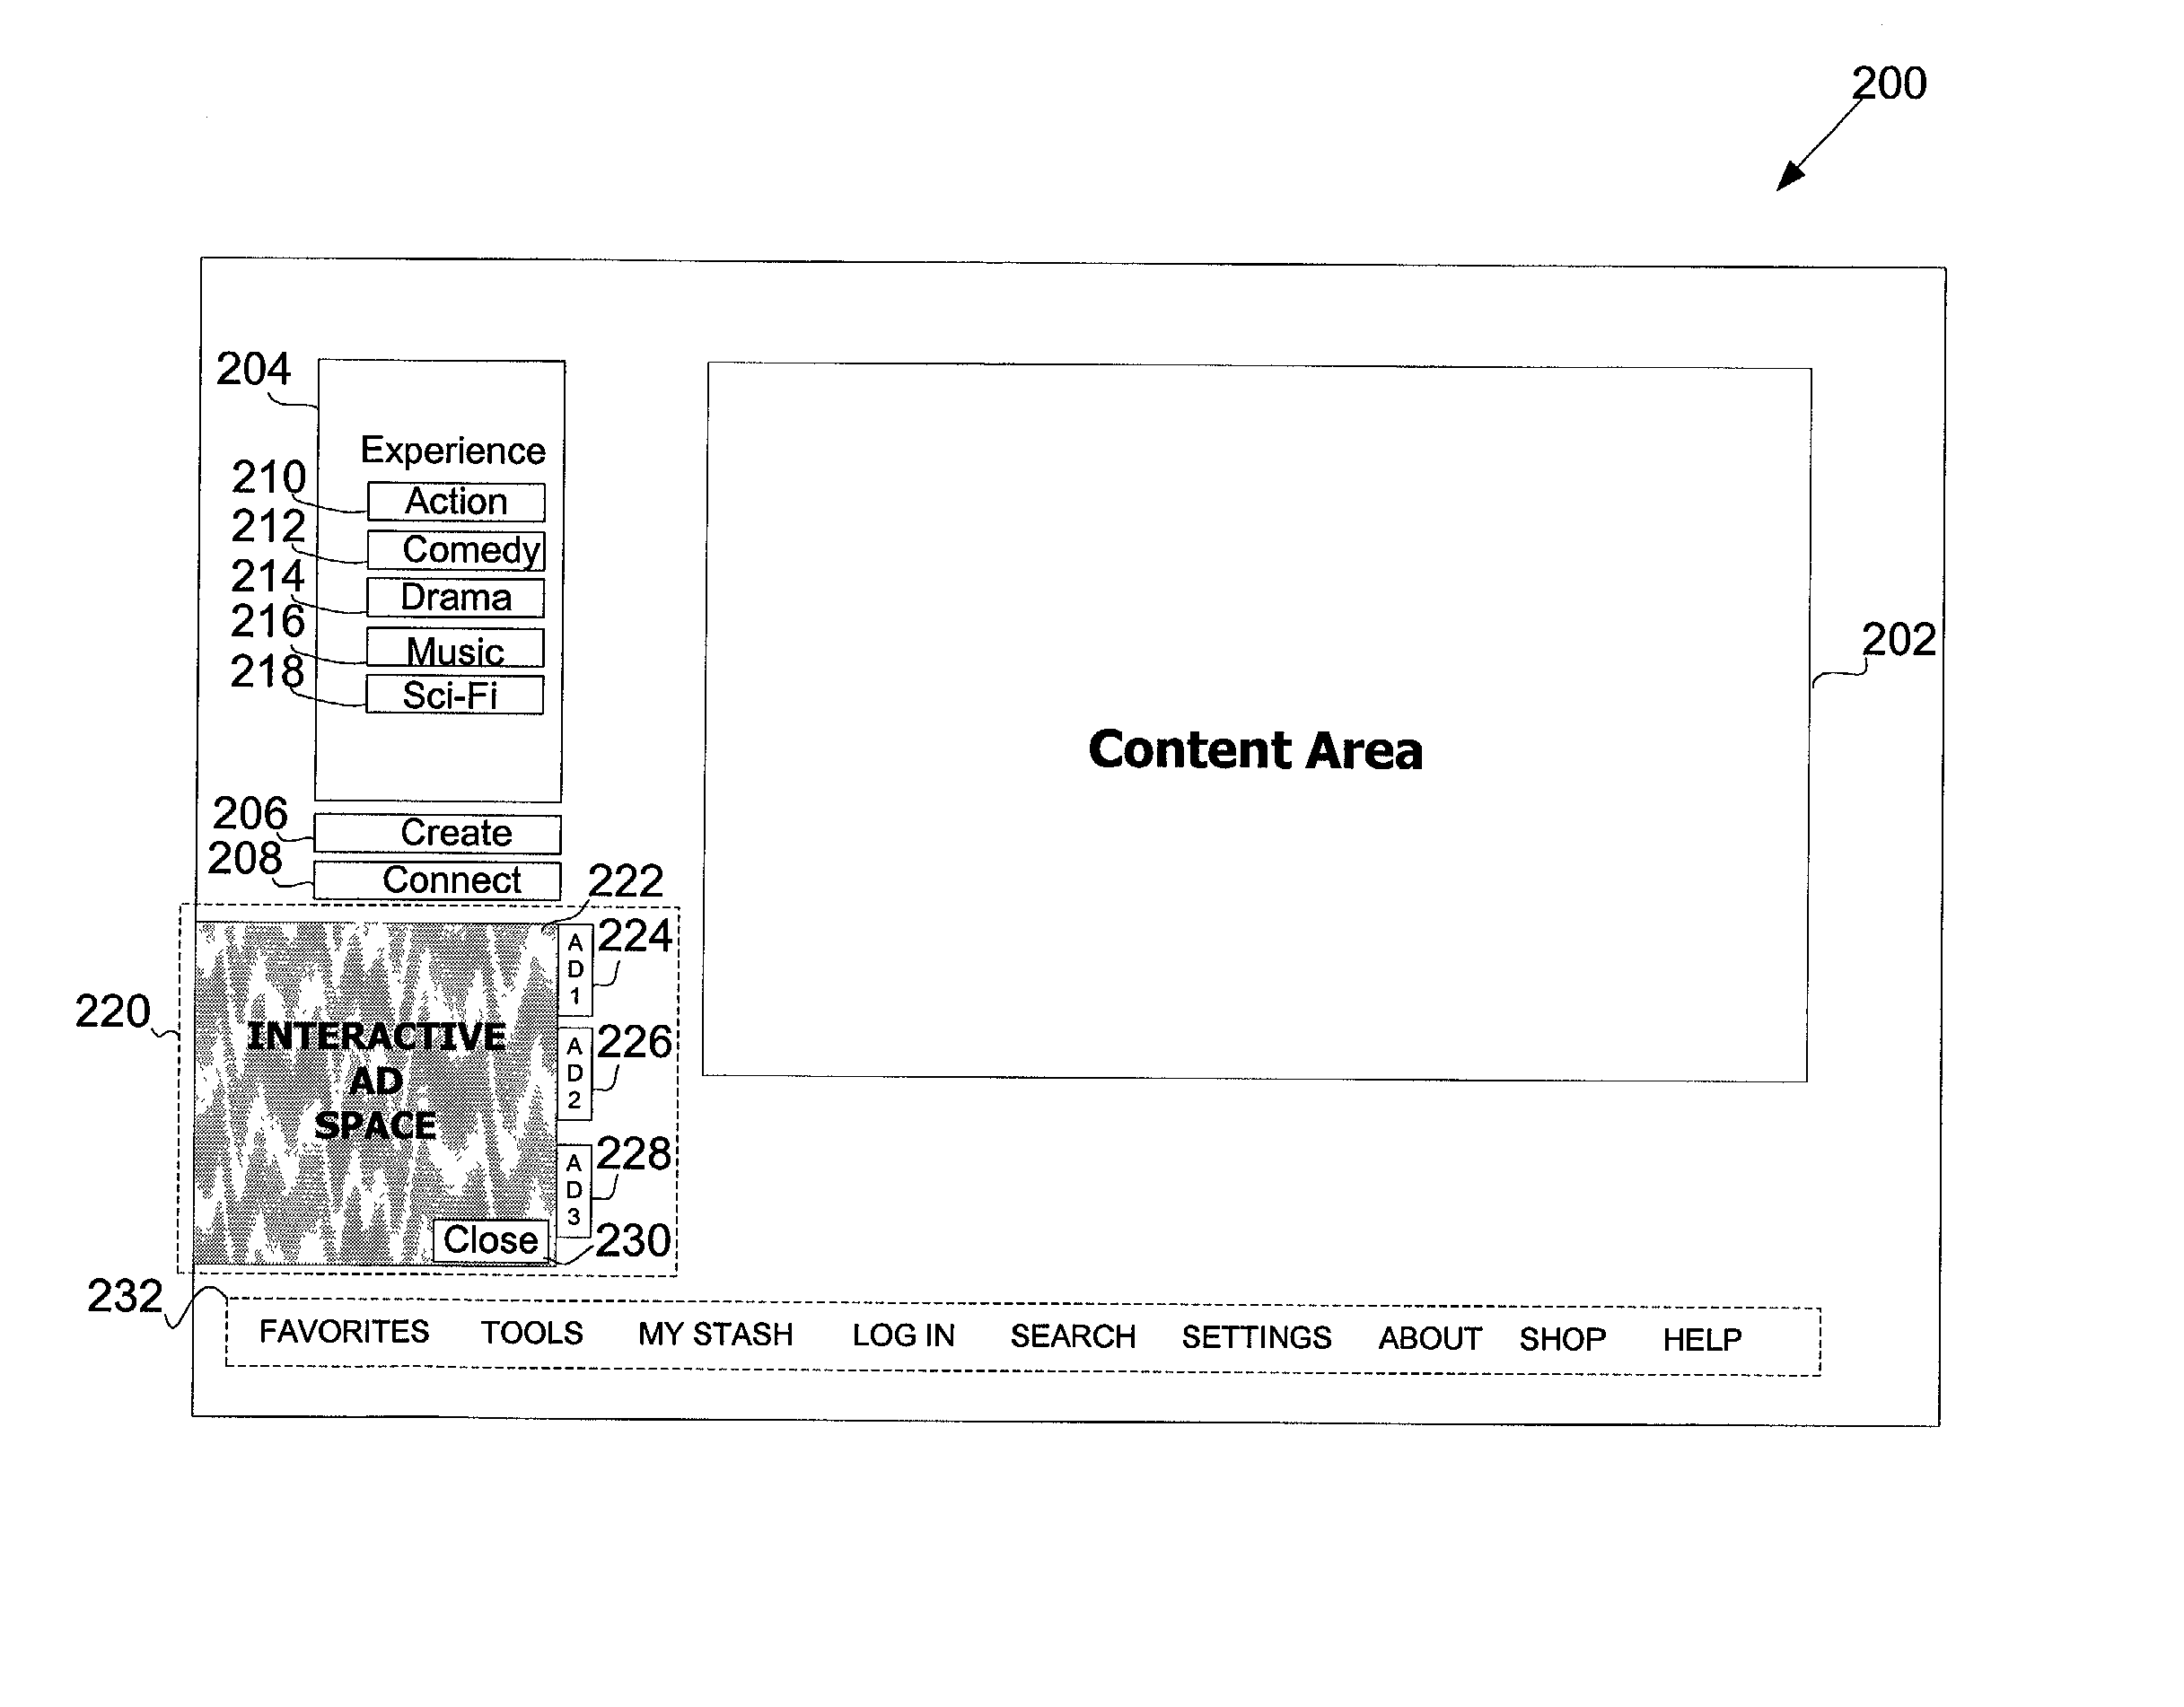 Dynamic graphical index of website content